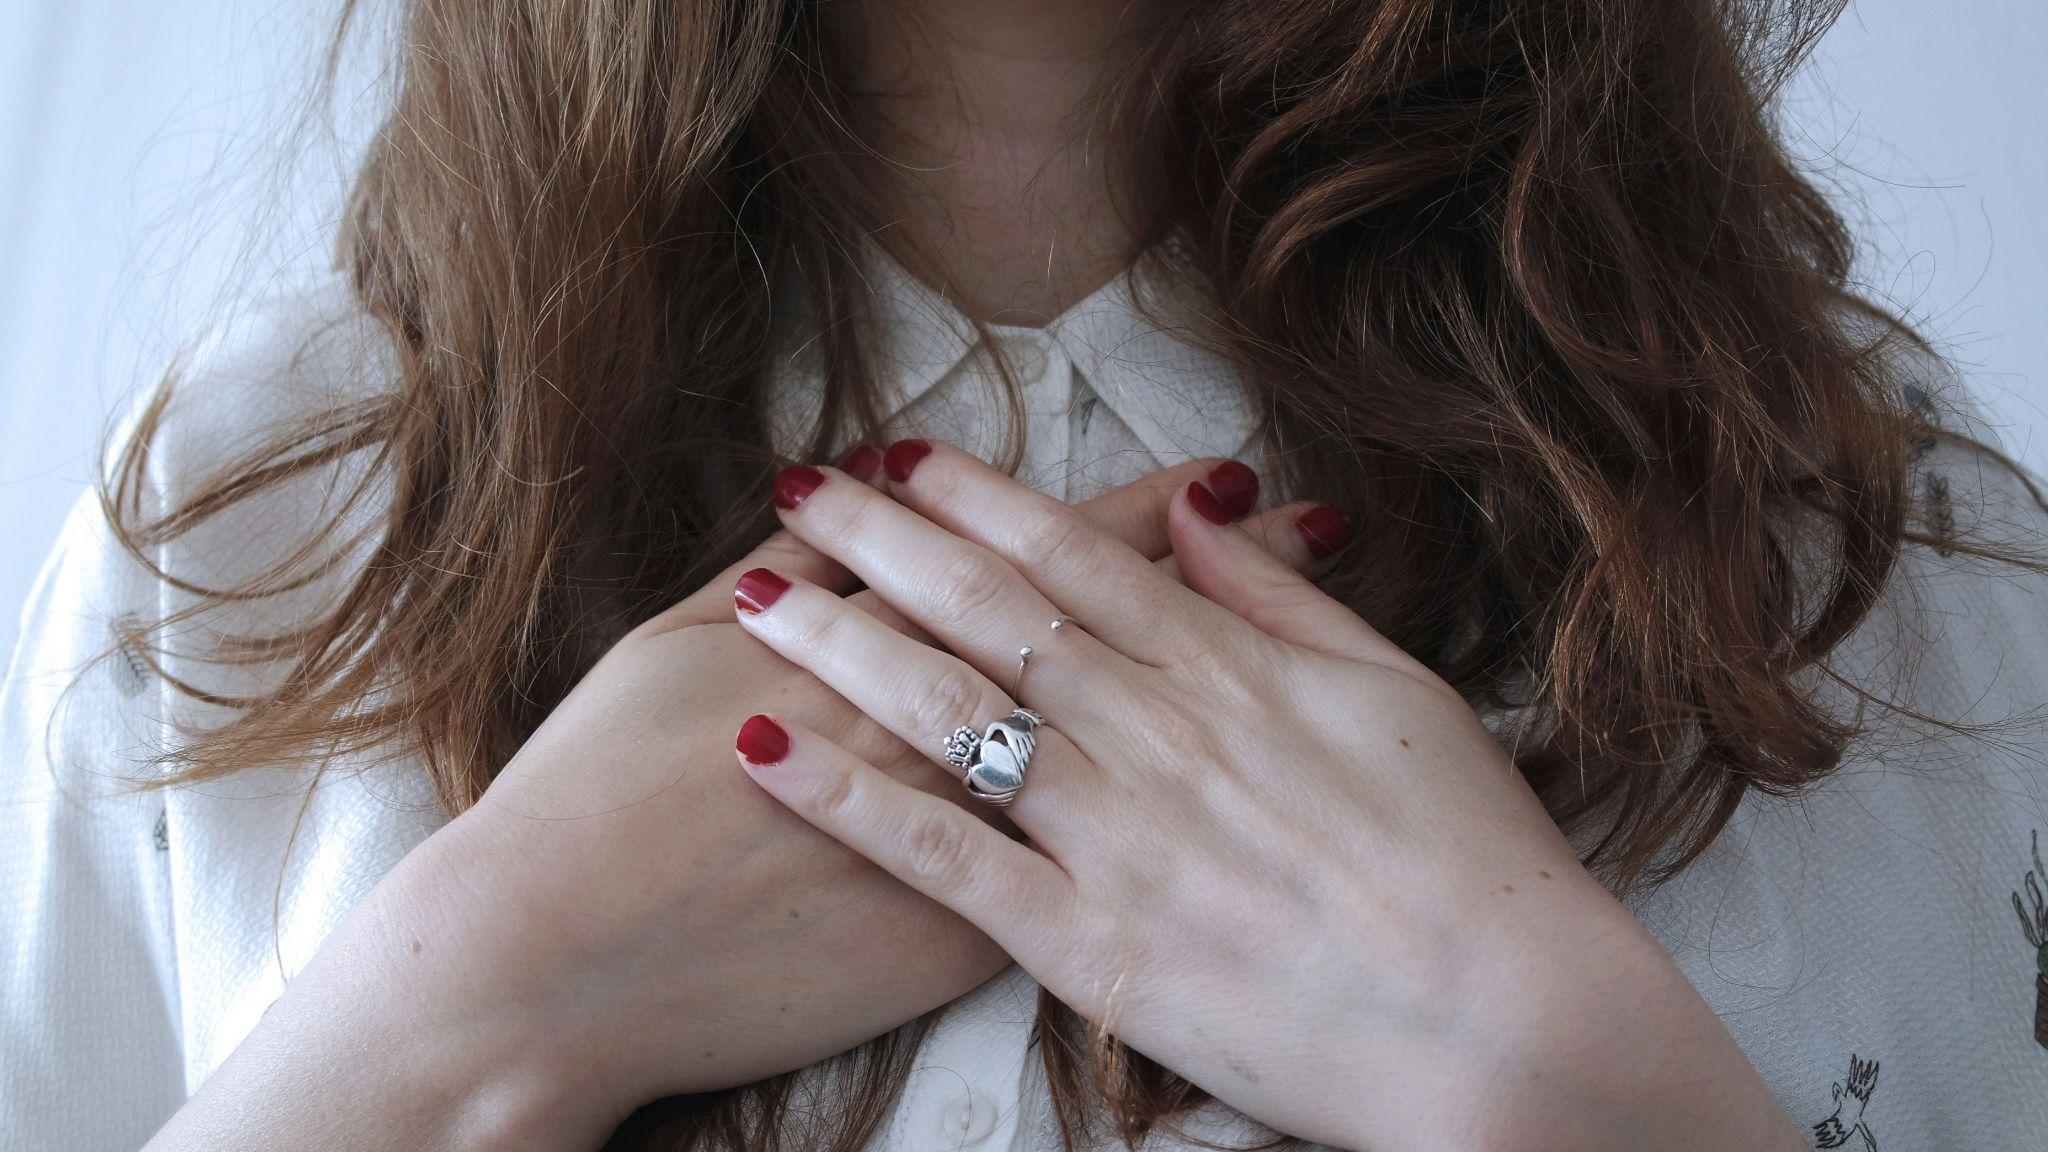 Woman wearing silver colored ring